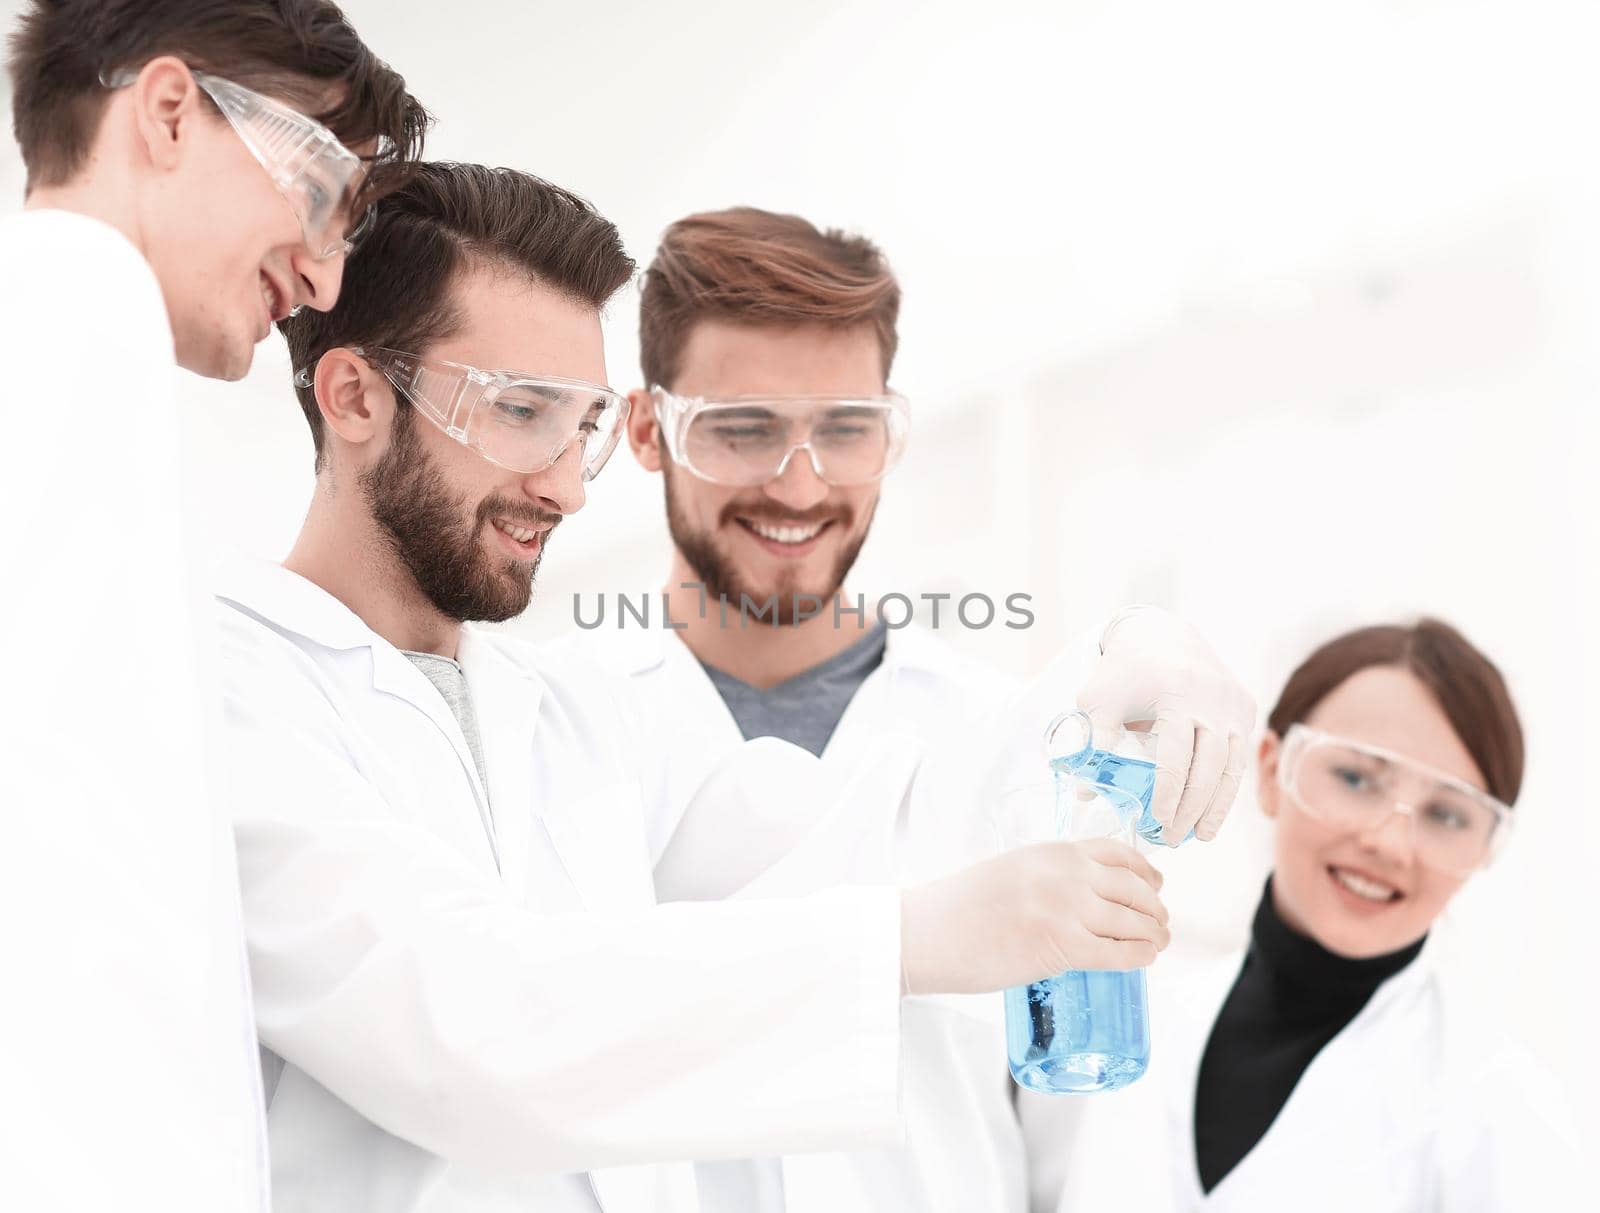 group of scientists working with chemicals by asdf